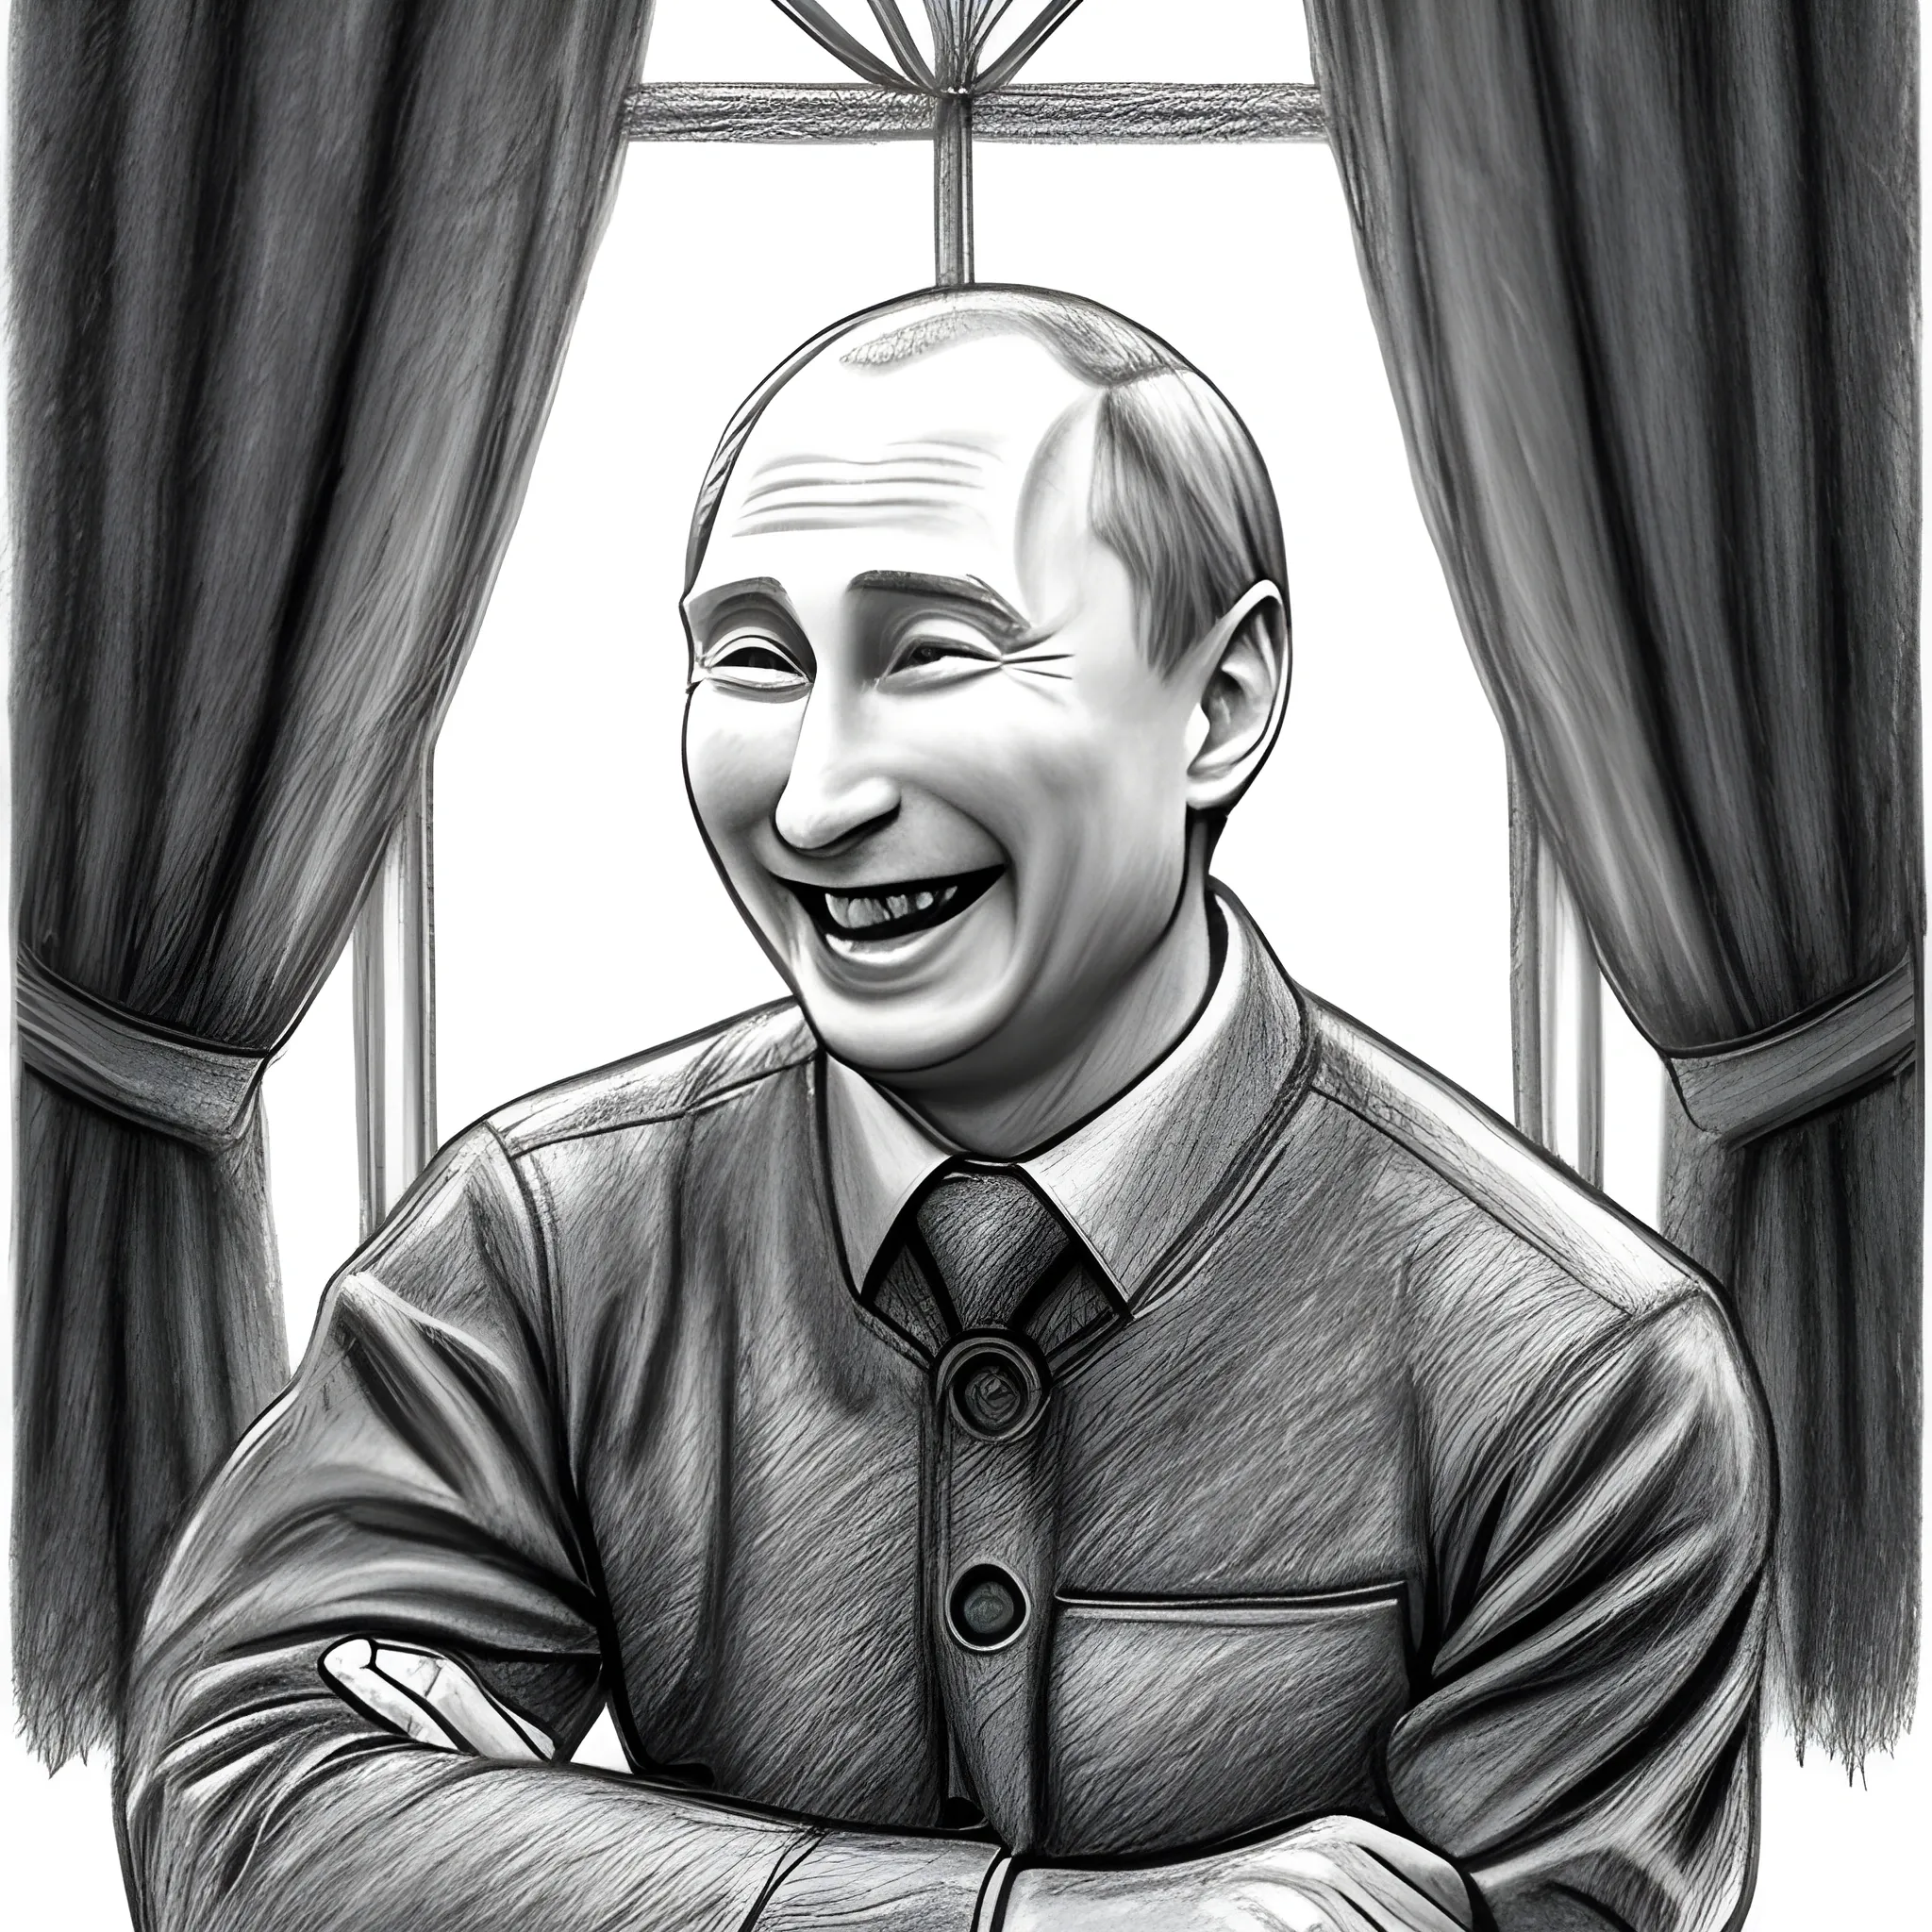 , Pencil Sketch putin laughing by the fire place as people look thrue window
